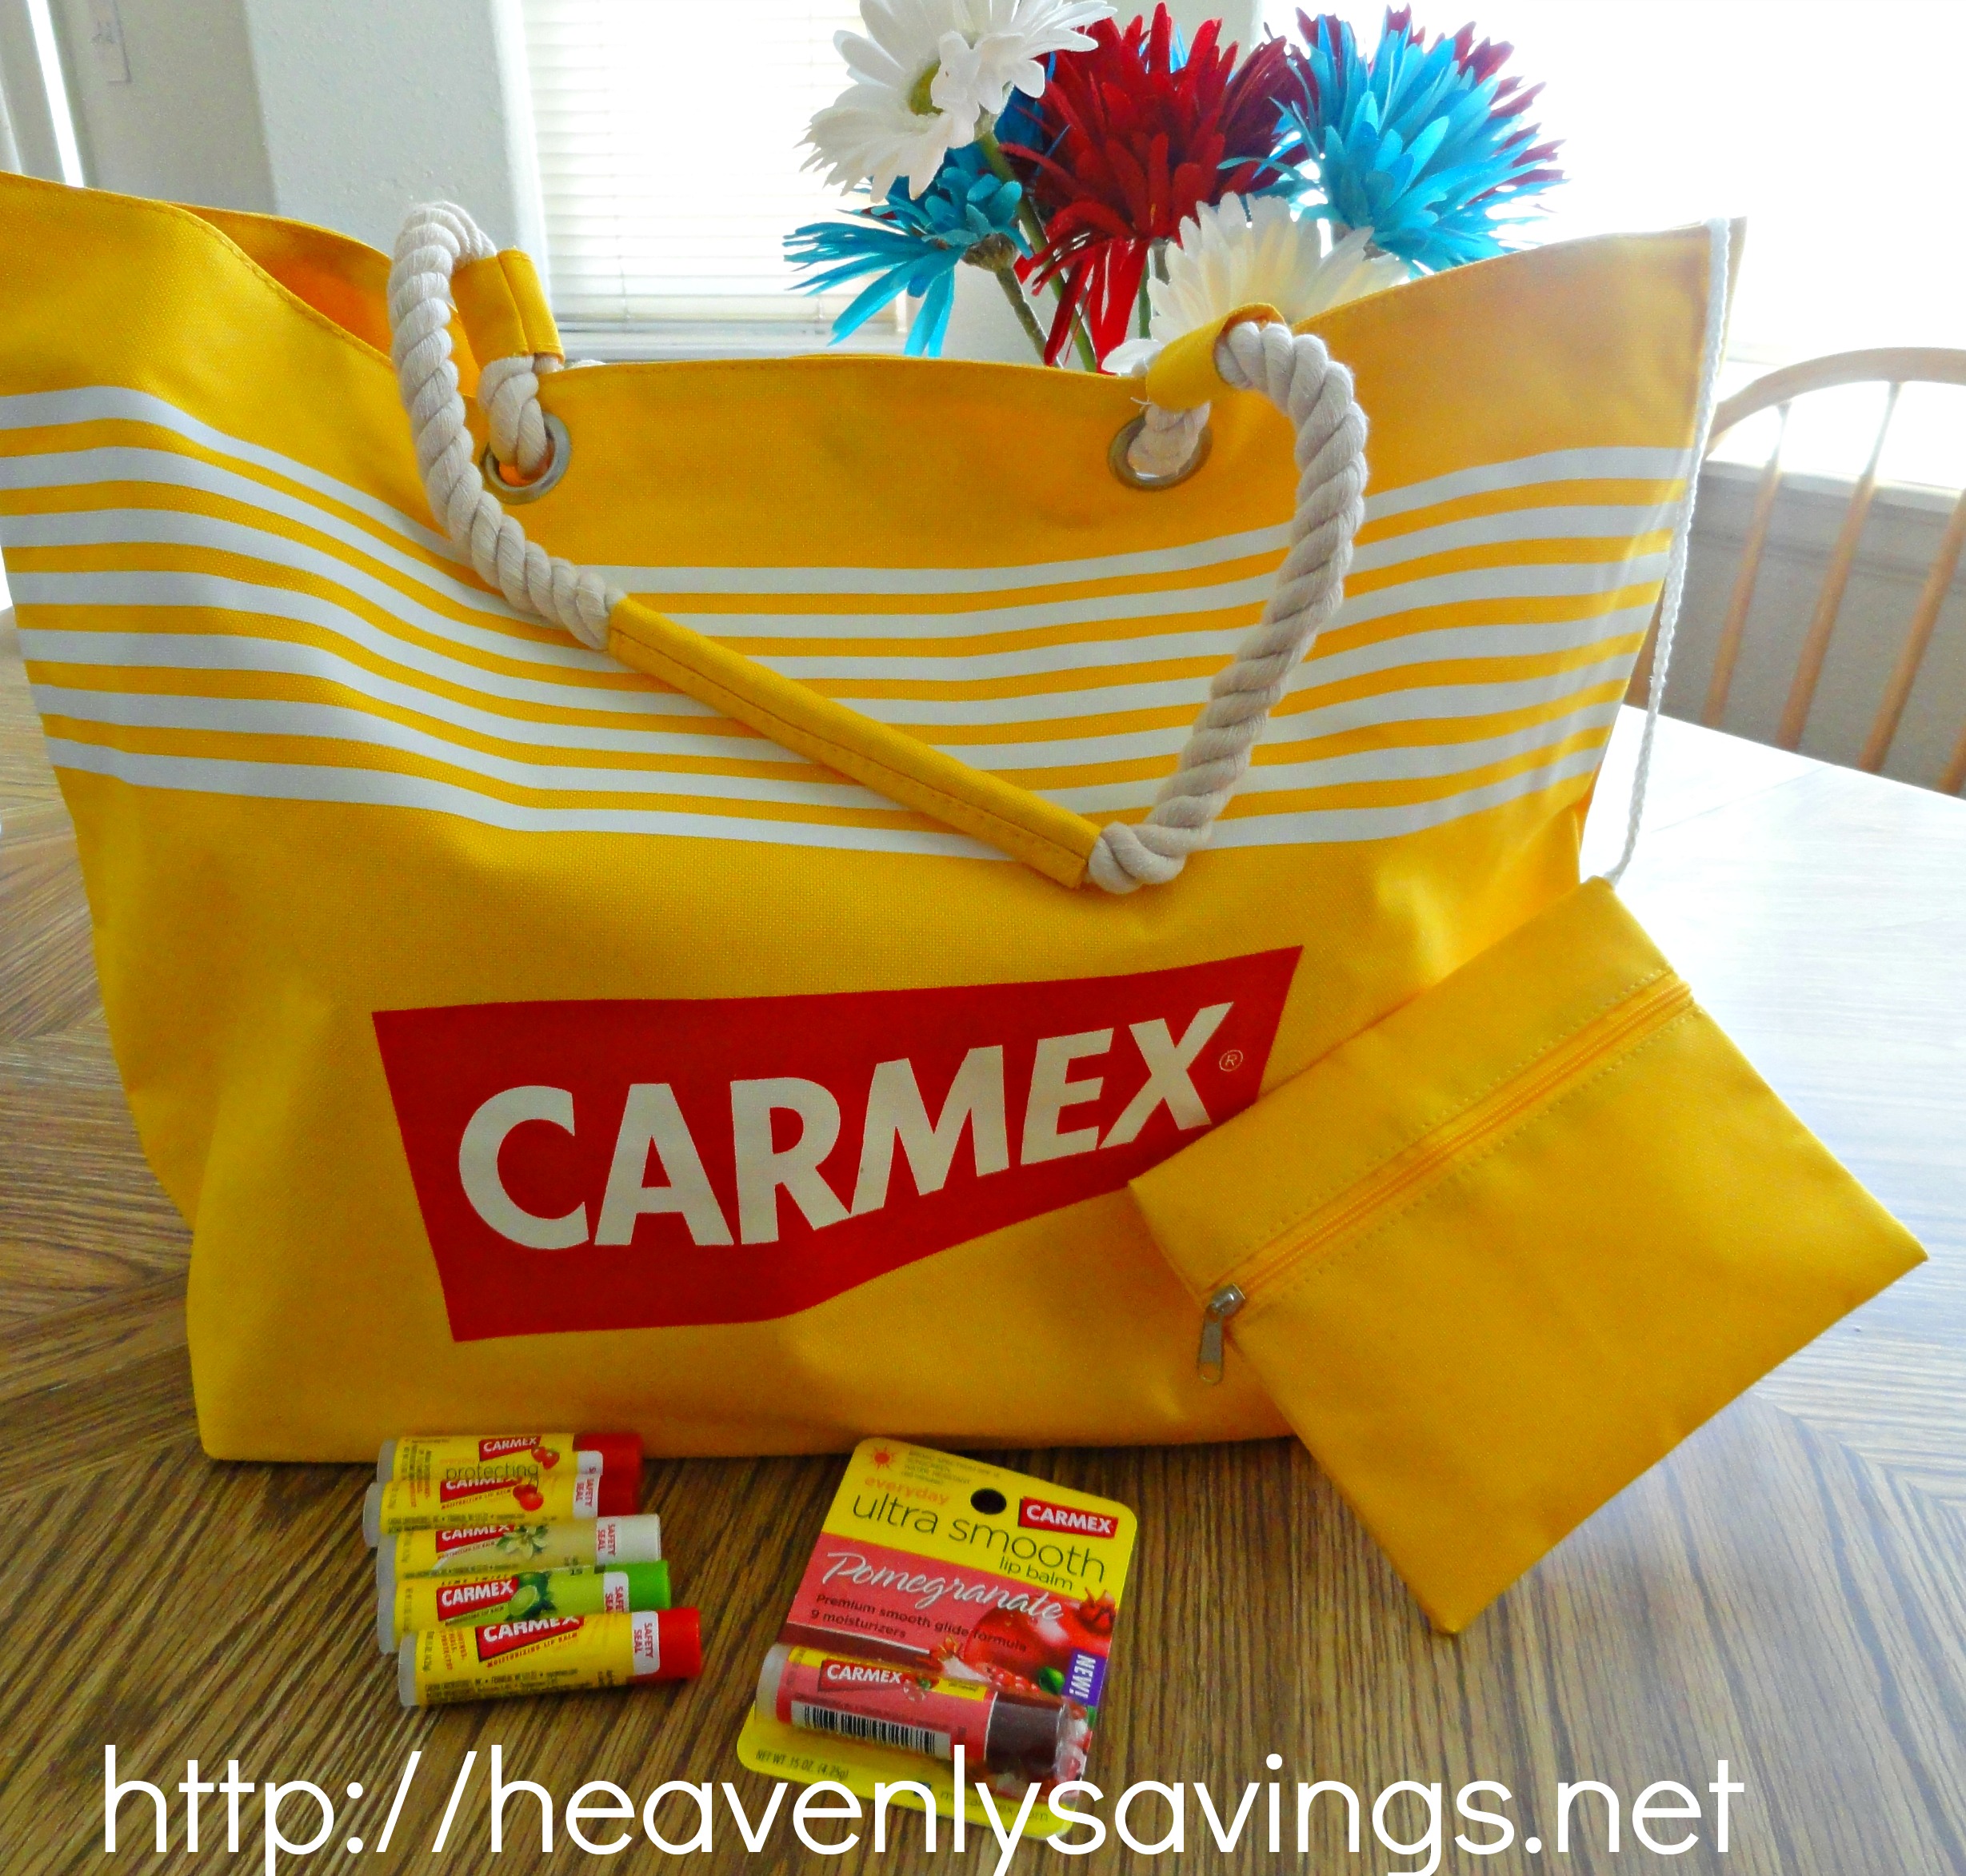 Carmex Prize Pack Review and Giveaway!